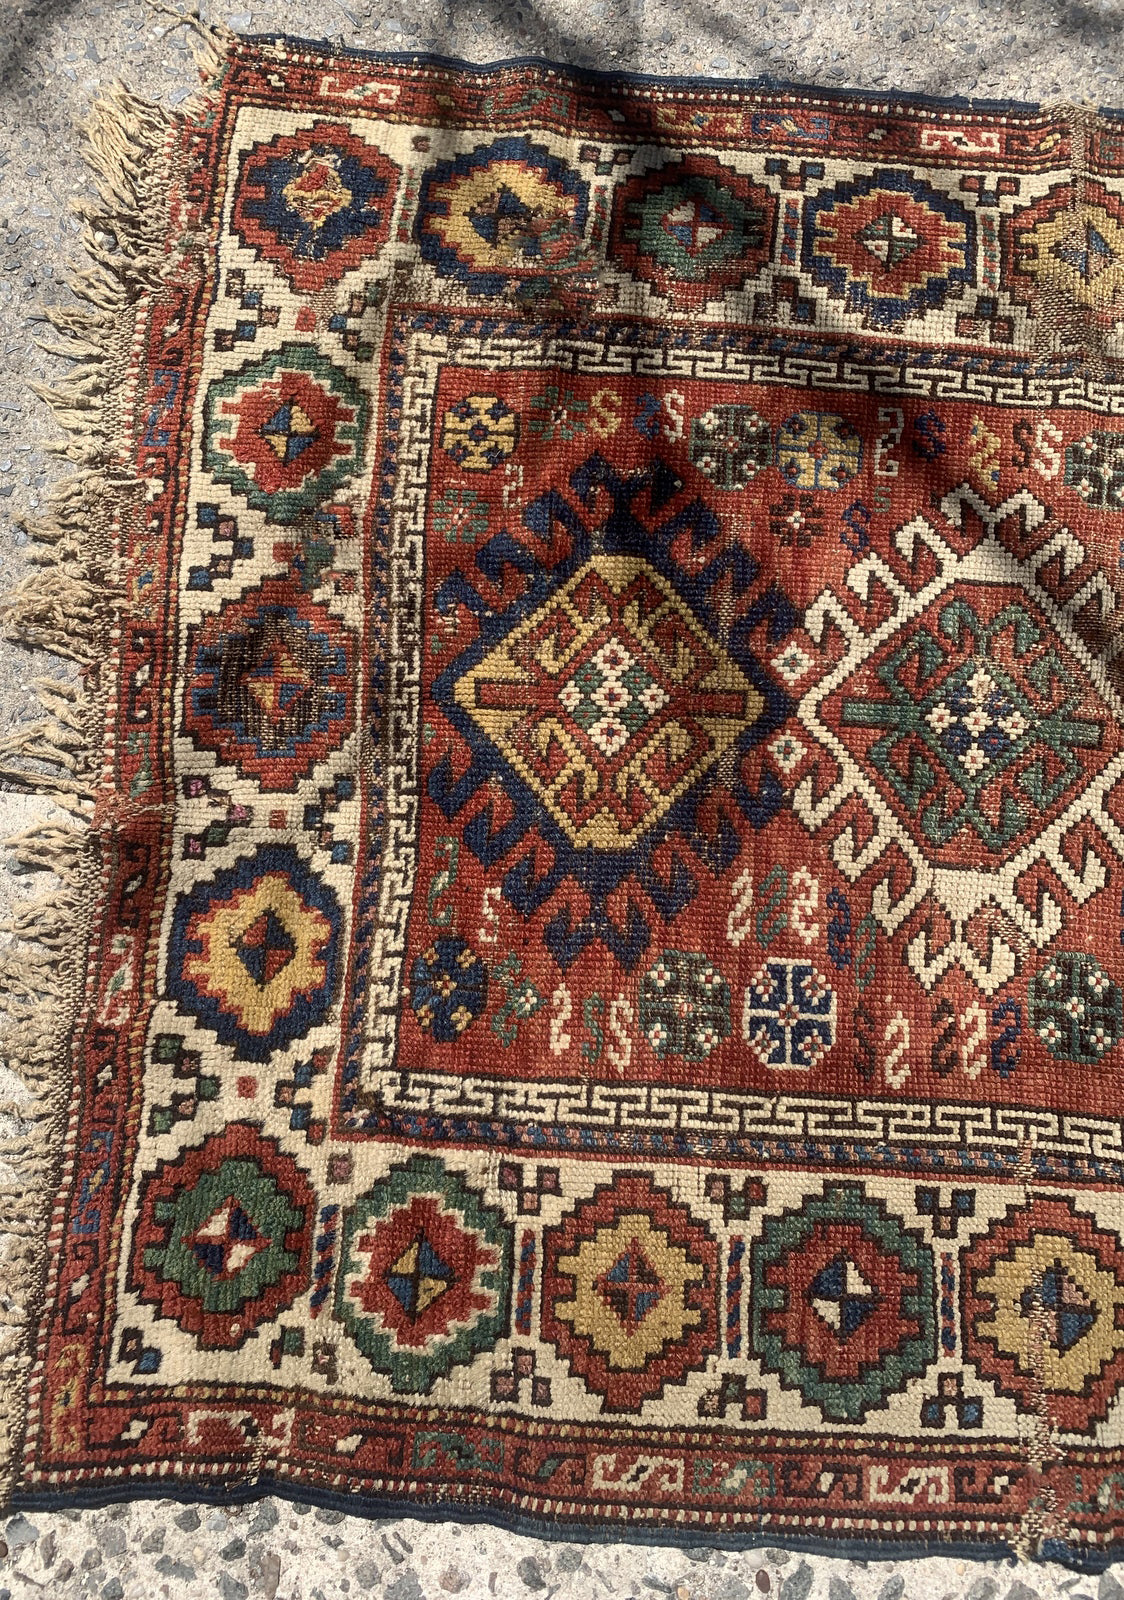 Handmade antique Caucasian Kazak rug in red color. The rug is from the end of 19th century in distressed condition.